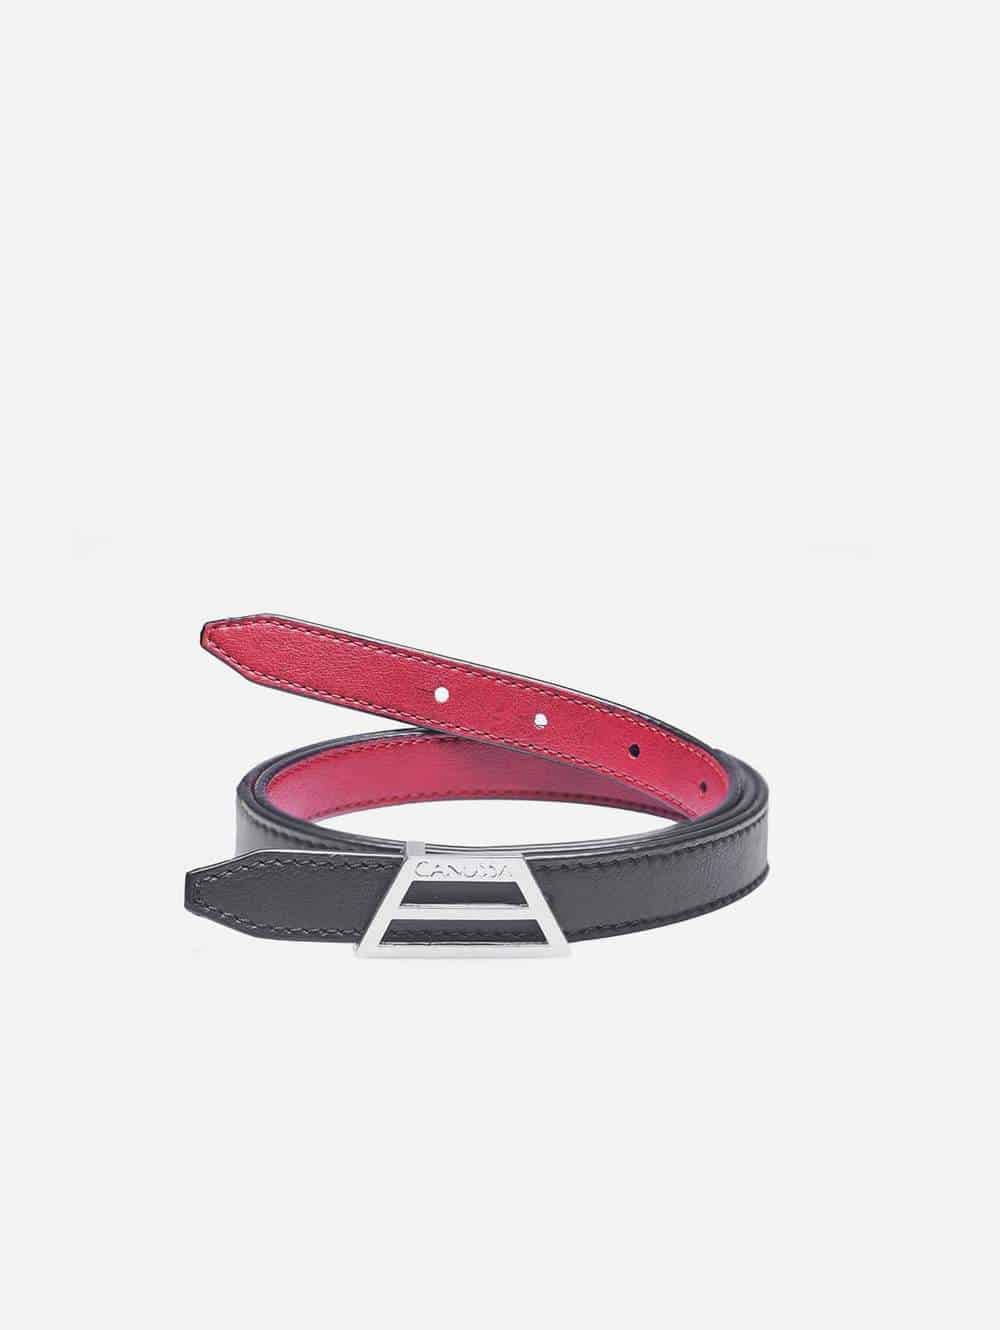 Vegan belts women's or men's - reversible black and red from Canussa